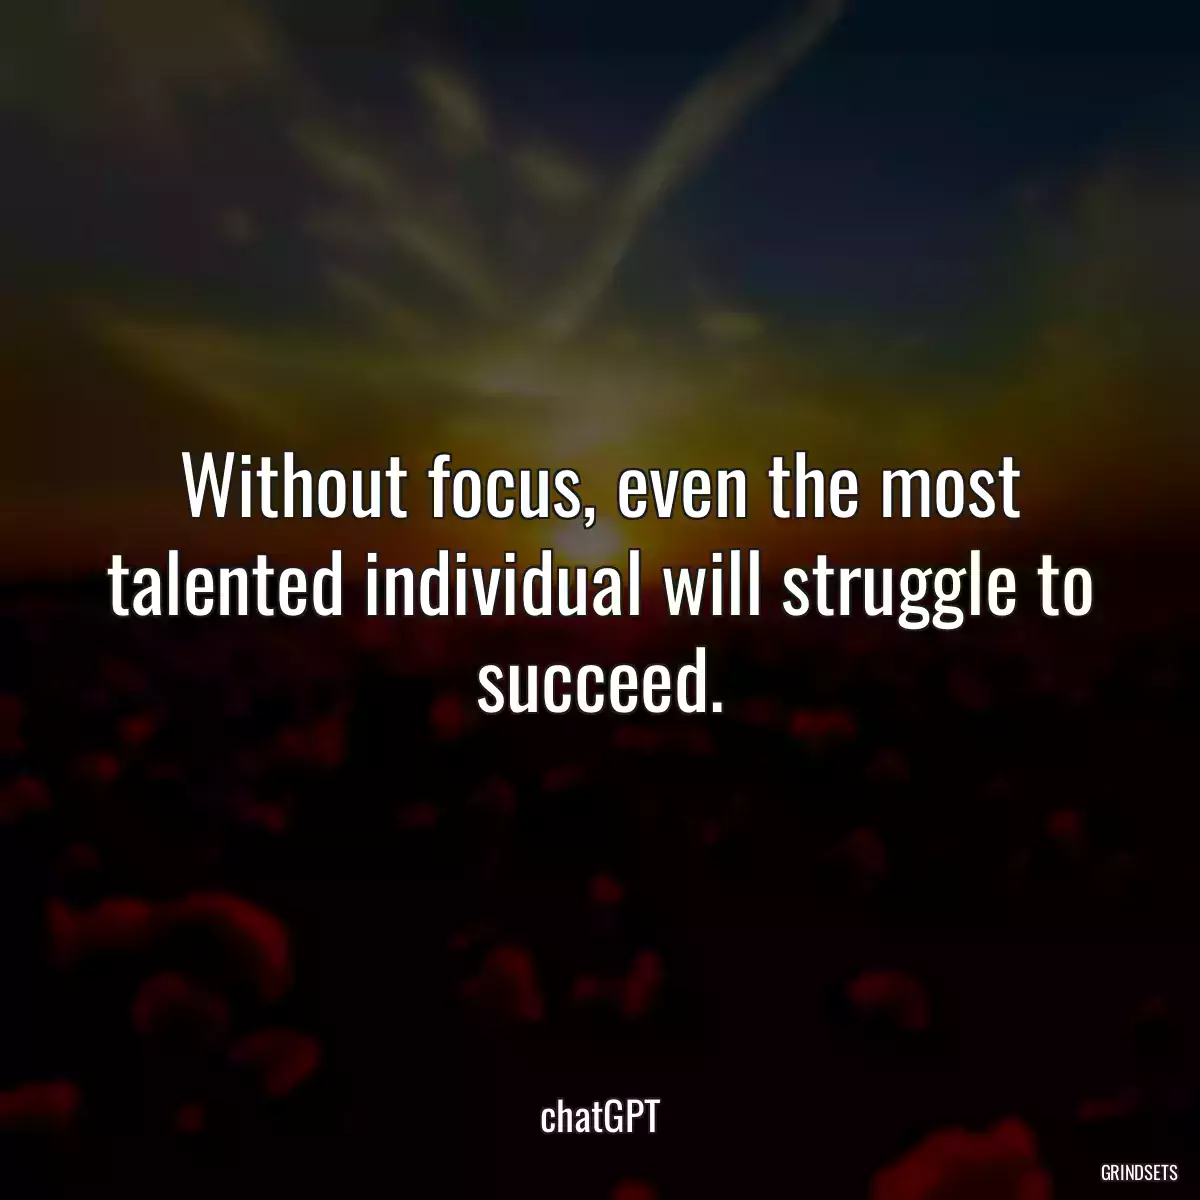 Without focus, even the most talented individual will struggle to succeed.